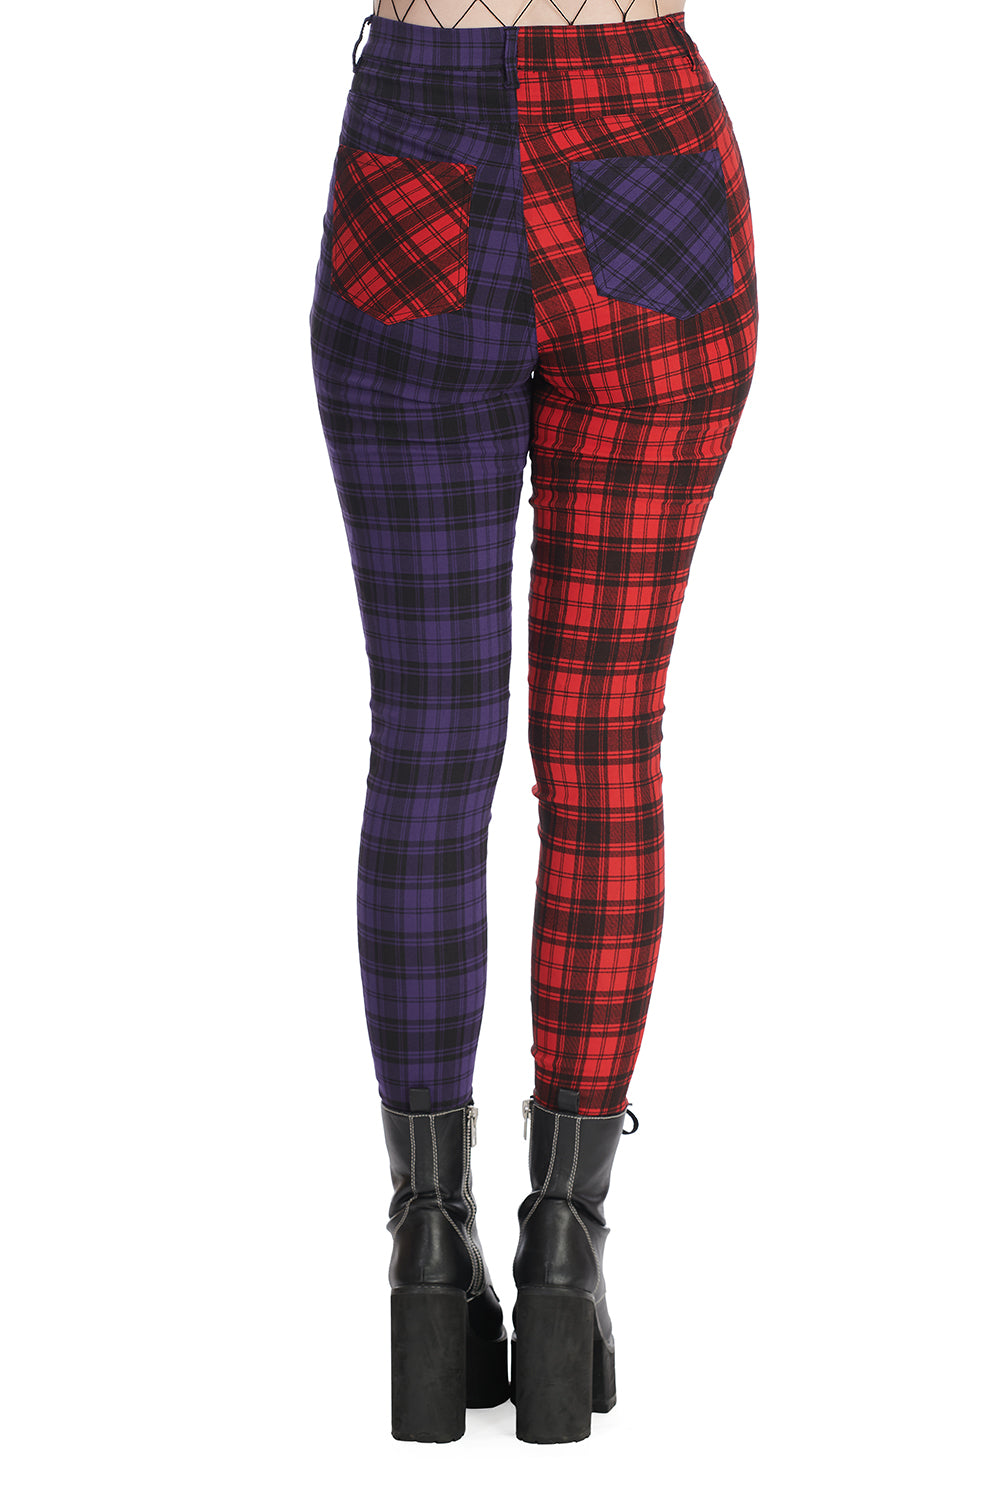 Banned Tartan Baily Trousers - Kate's Clothing